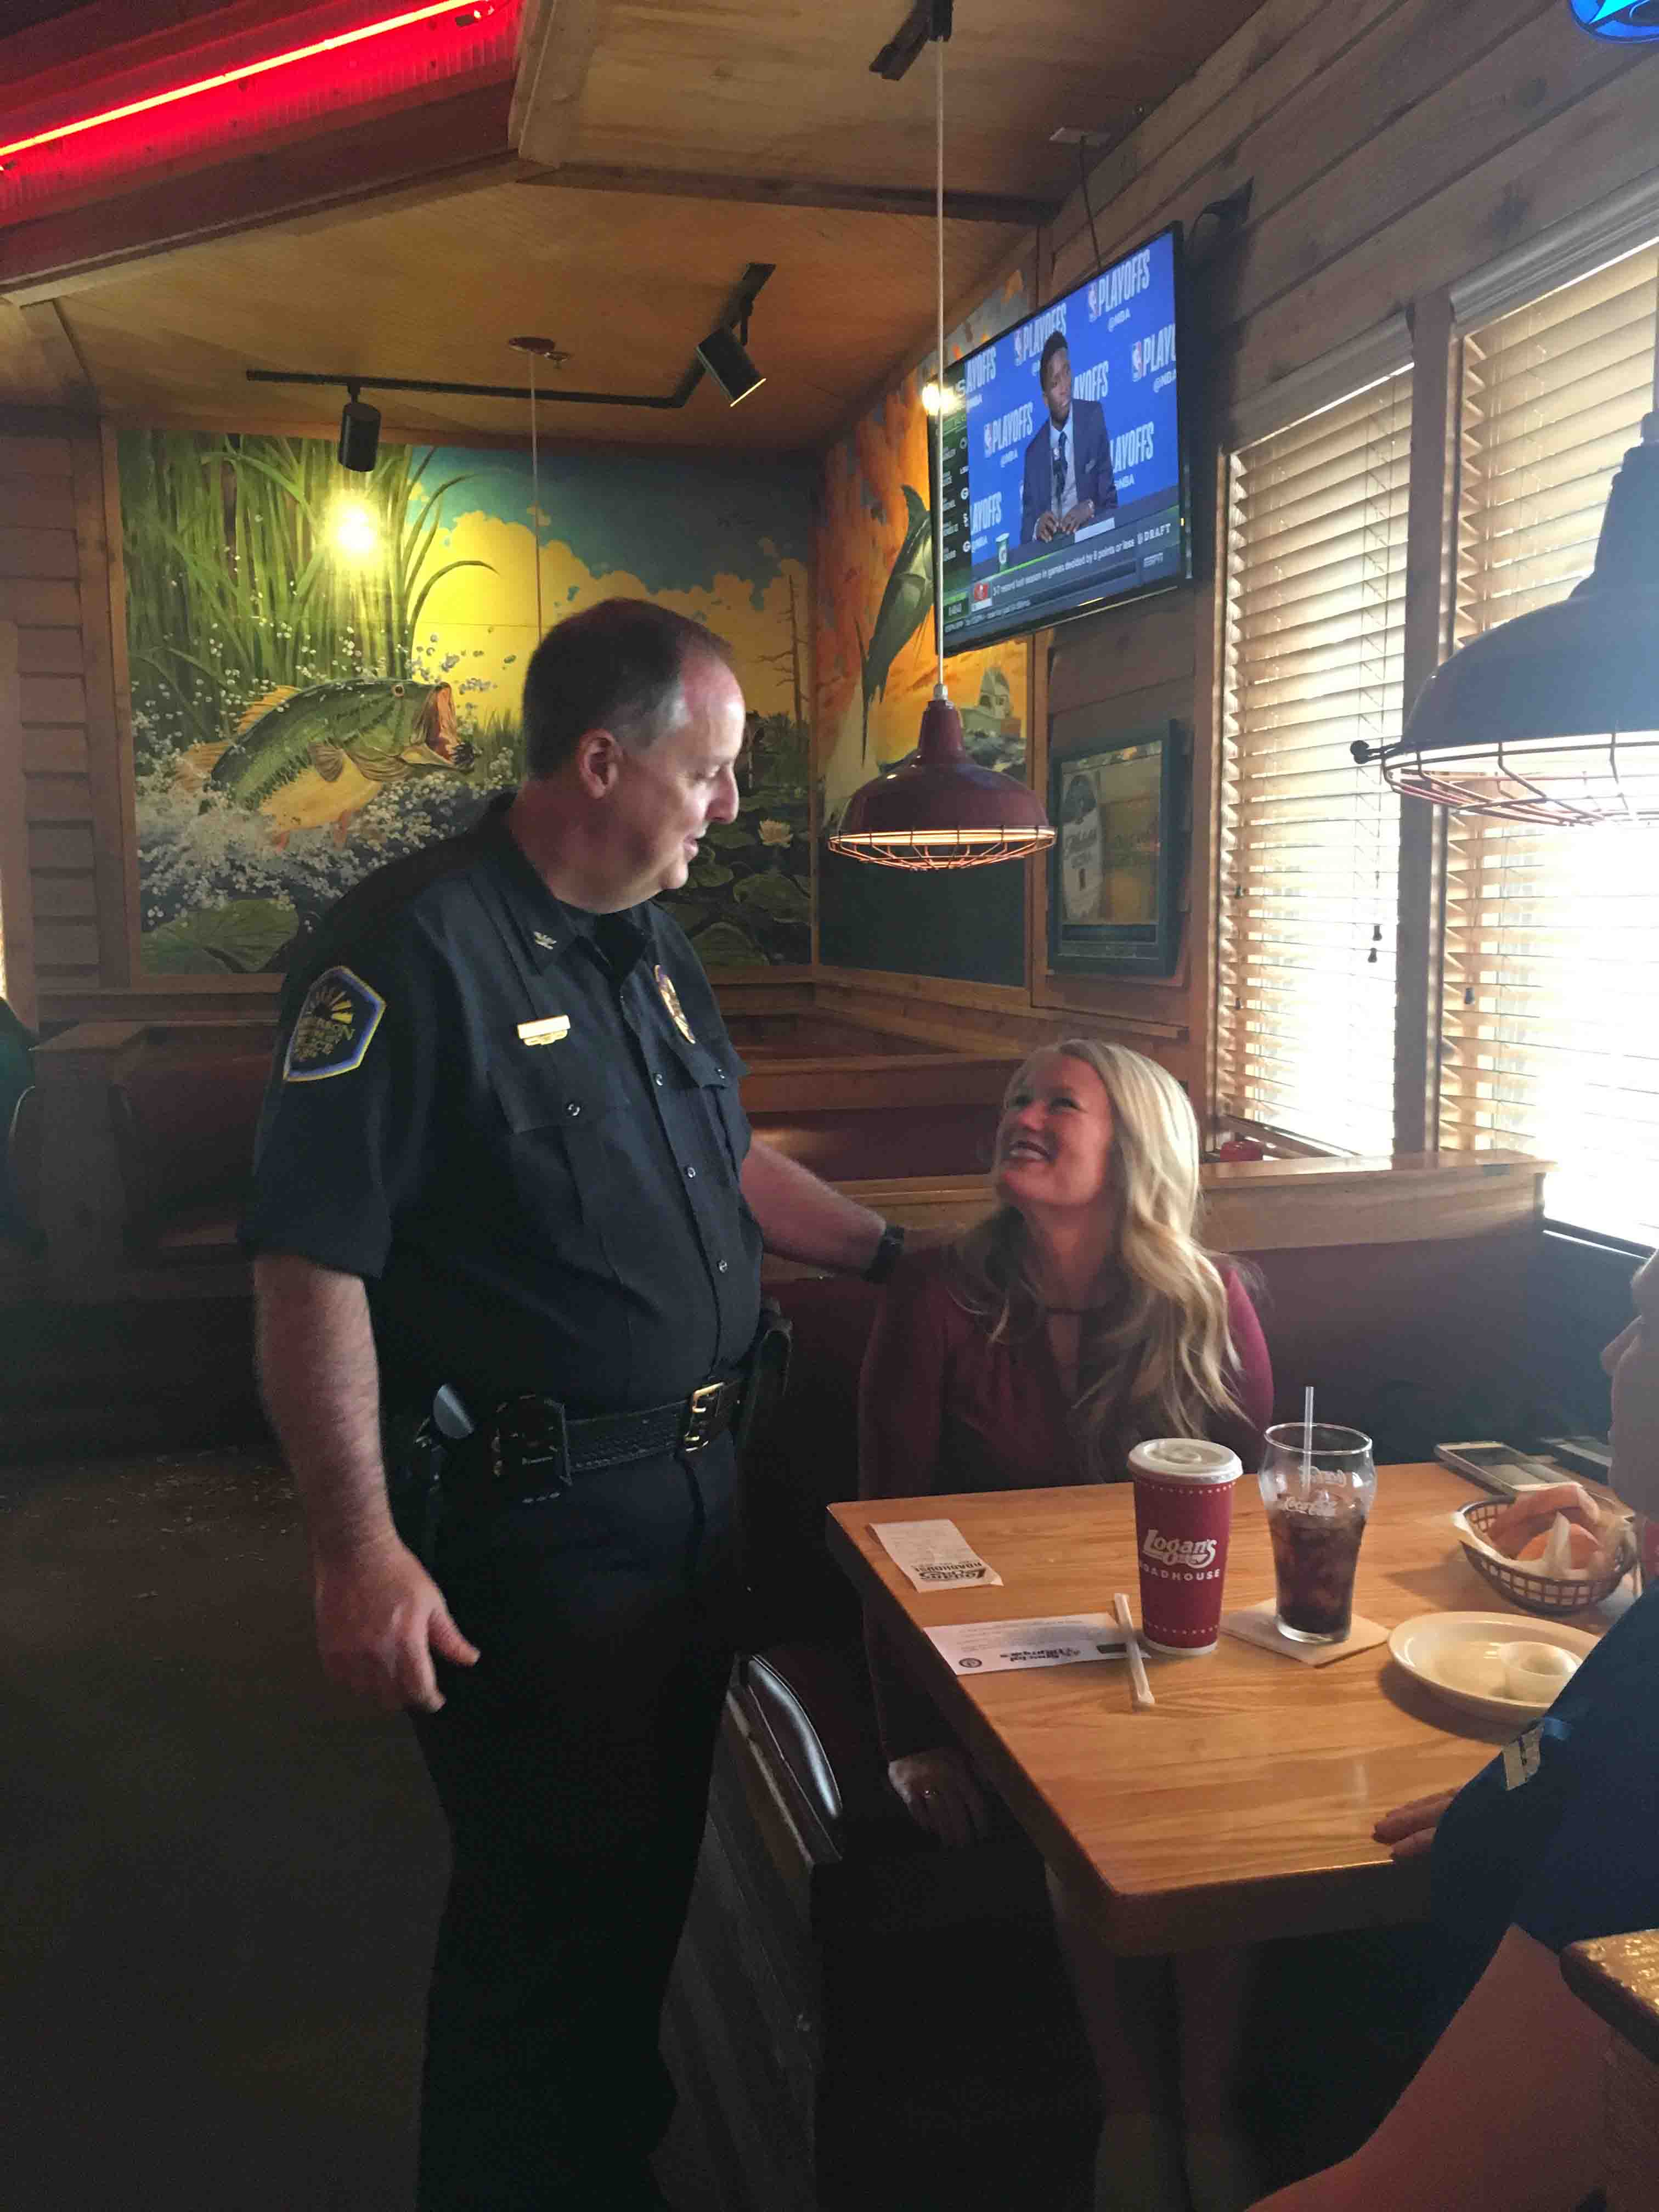 Anderson Police Chief Jim Stewart waits tables at local restaurant